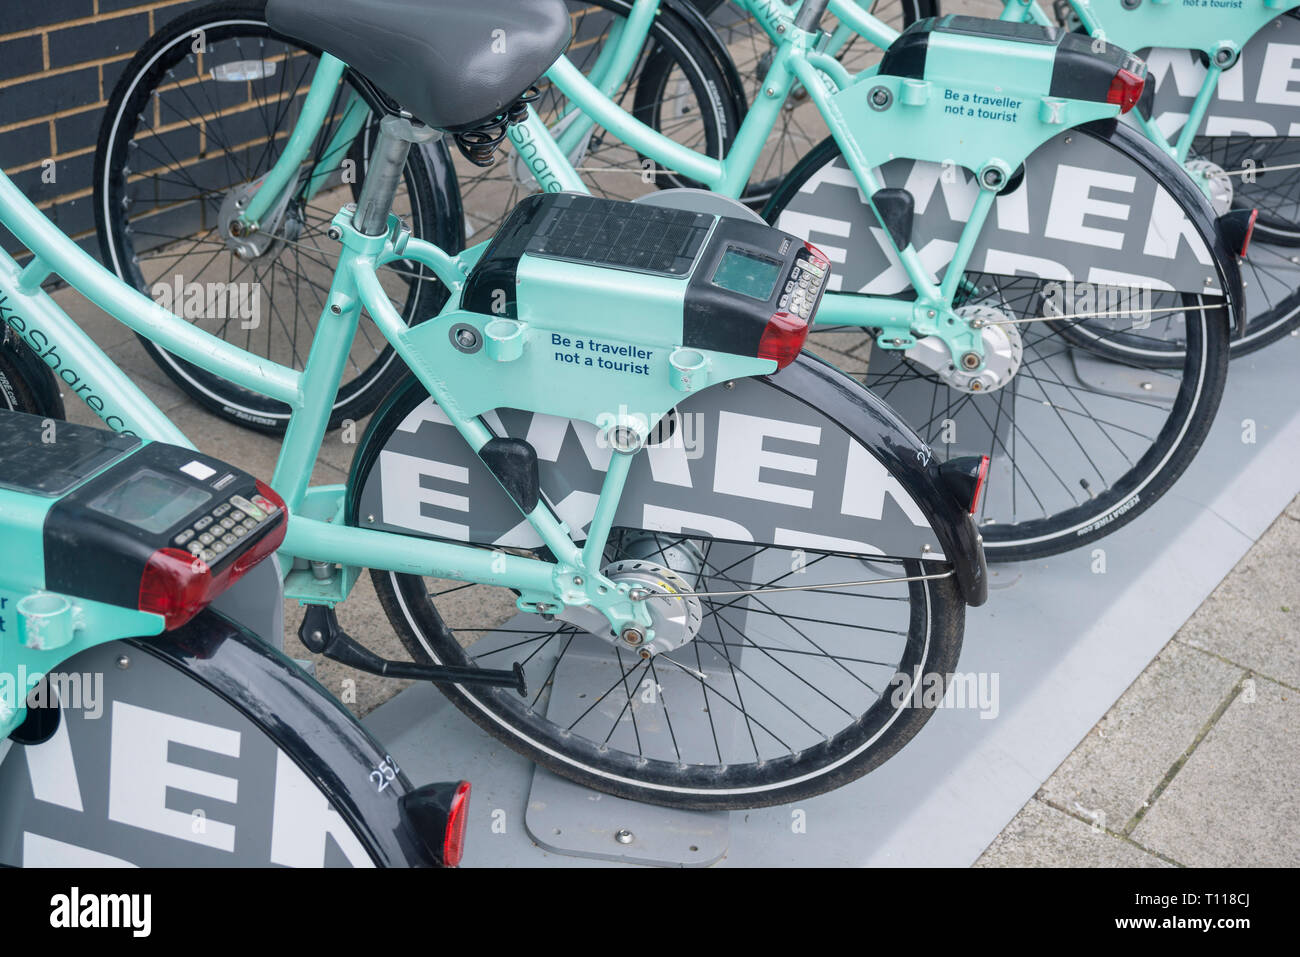 photos of the BTN Brighton Bike Hire Scheme bikes being used out on the streets by real people and in storage Stock Photo